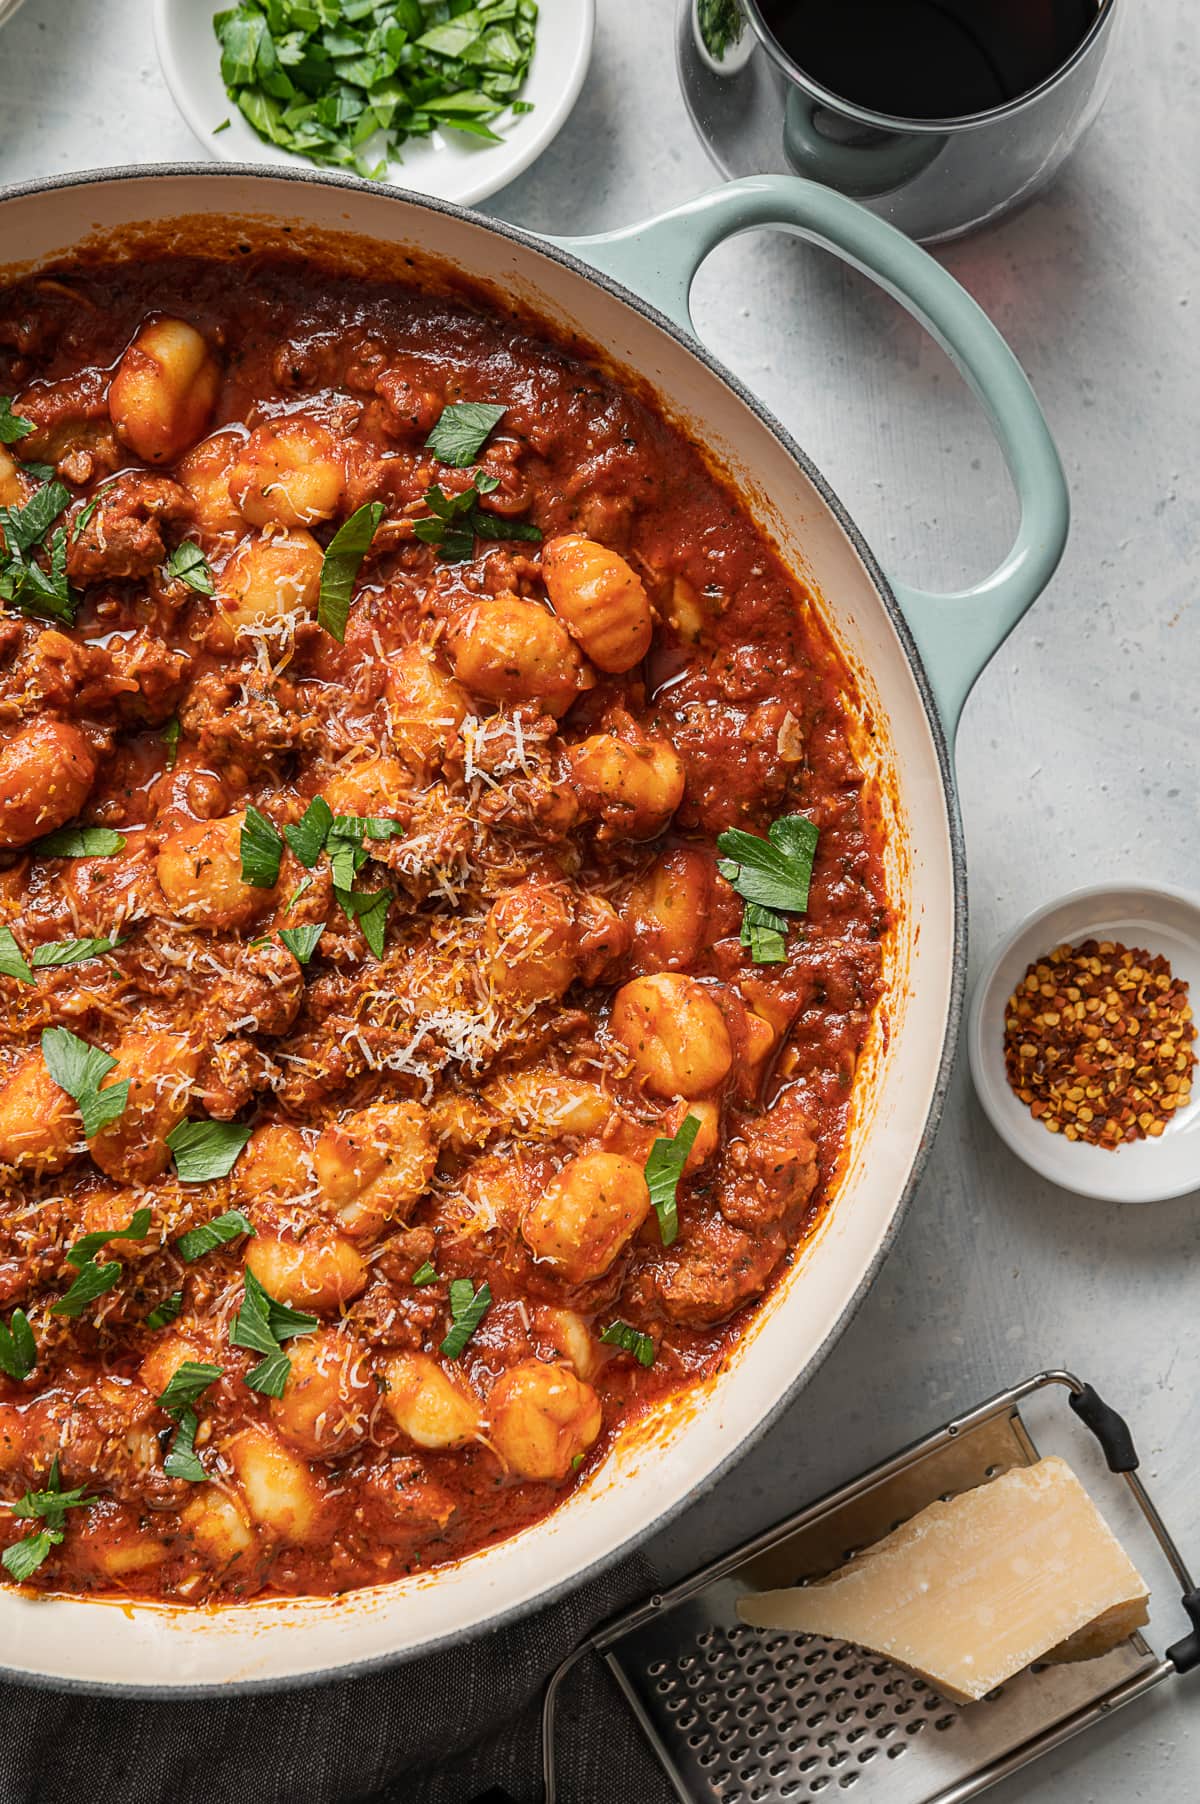 large aqua pan with sausage and gnocchi with red tomato sauce, glasse of red wine, bowl of green parsley, bowl of red pepper flakes, grater and chunk of parmesan cheese